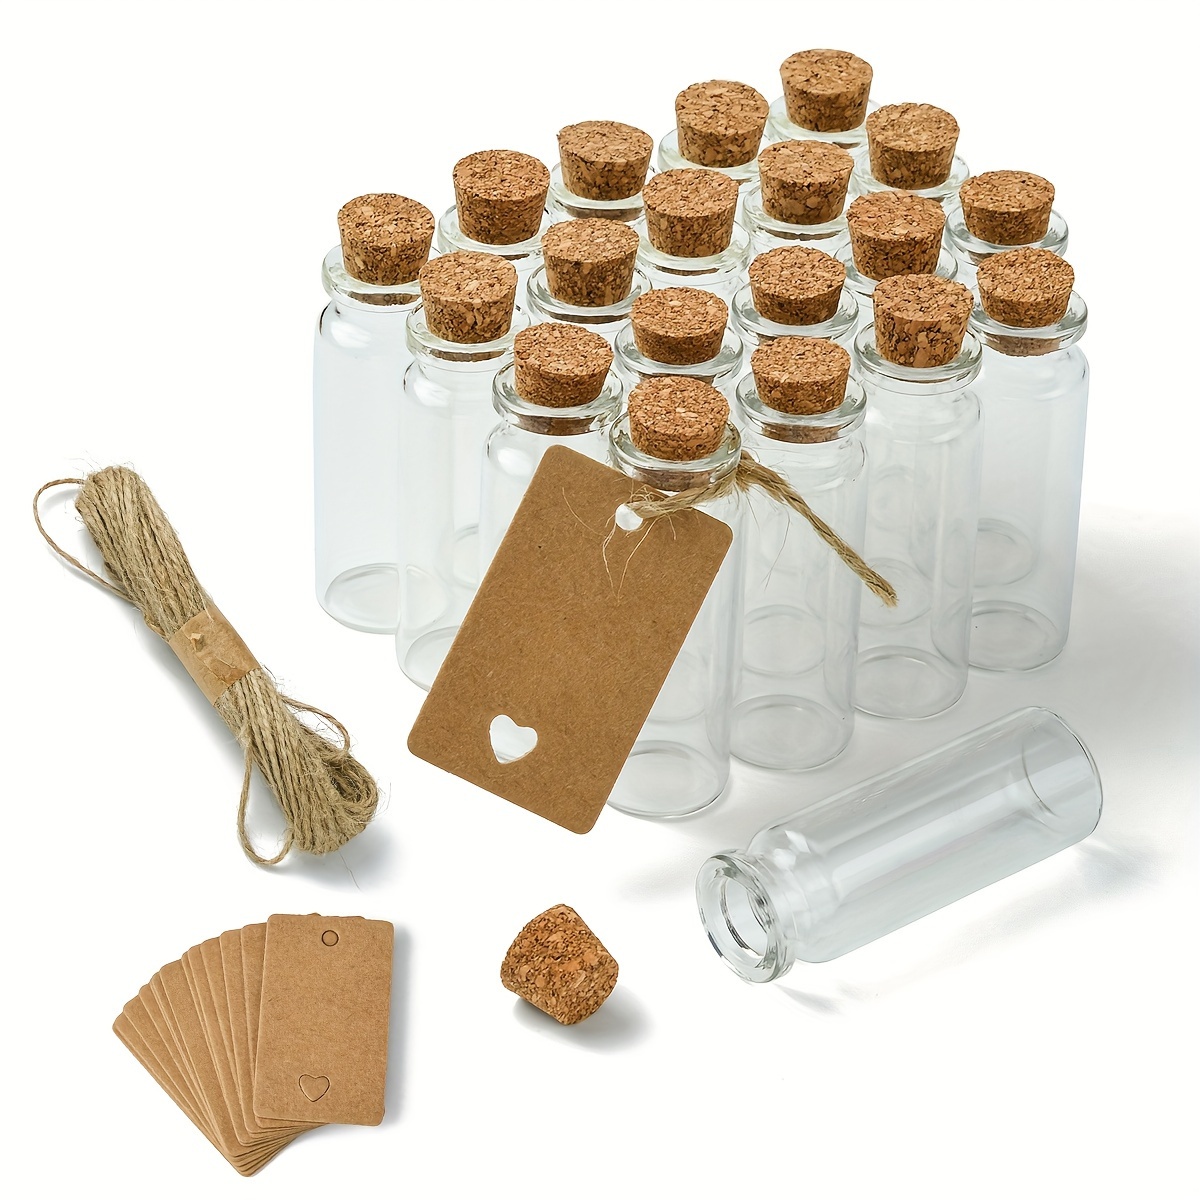 

20pcs/set Mini Glass Bottles With Corks, 20 Brown Paper Labels, And 10m Twine, Small Transparent Storage Vials For Wedding Favors, Party Gifts, Diy Crafts